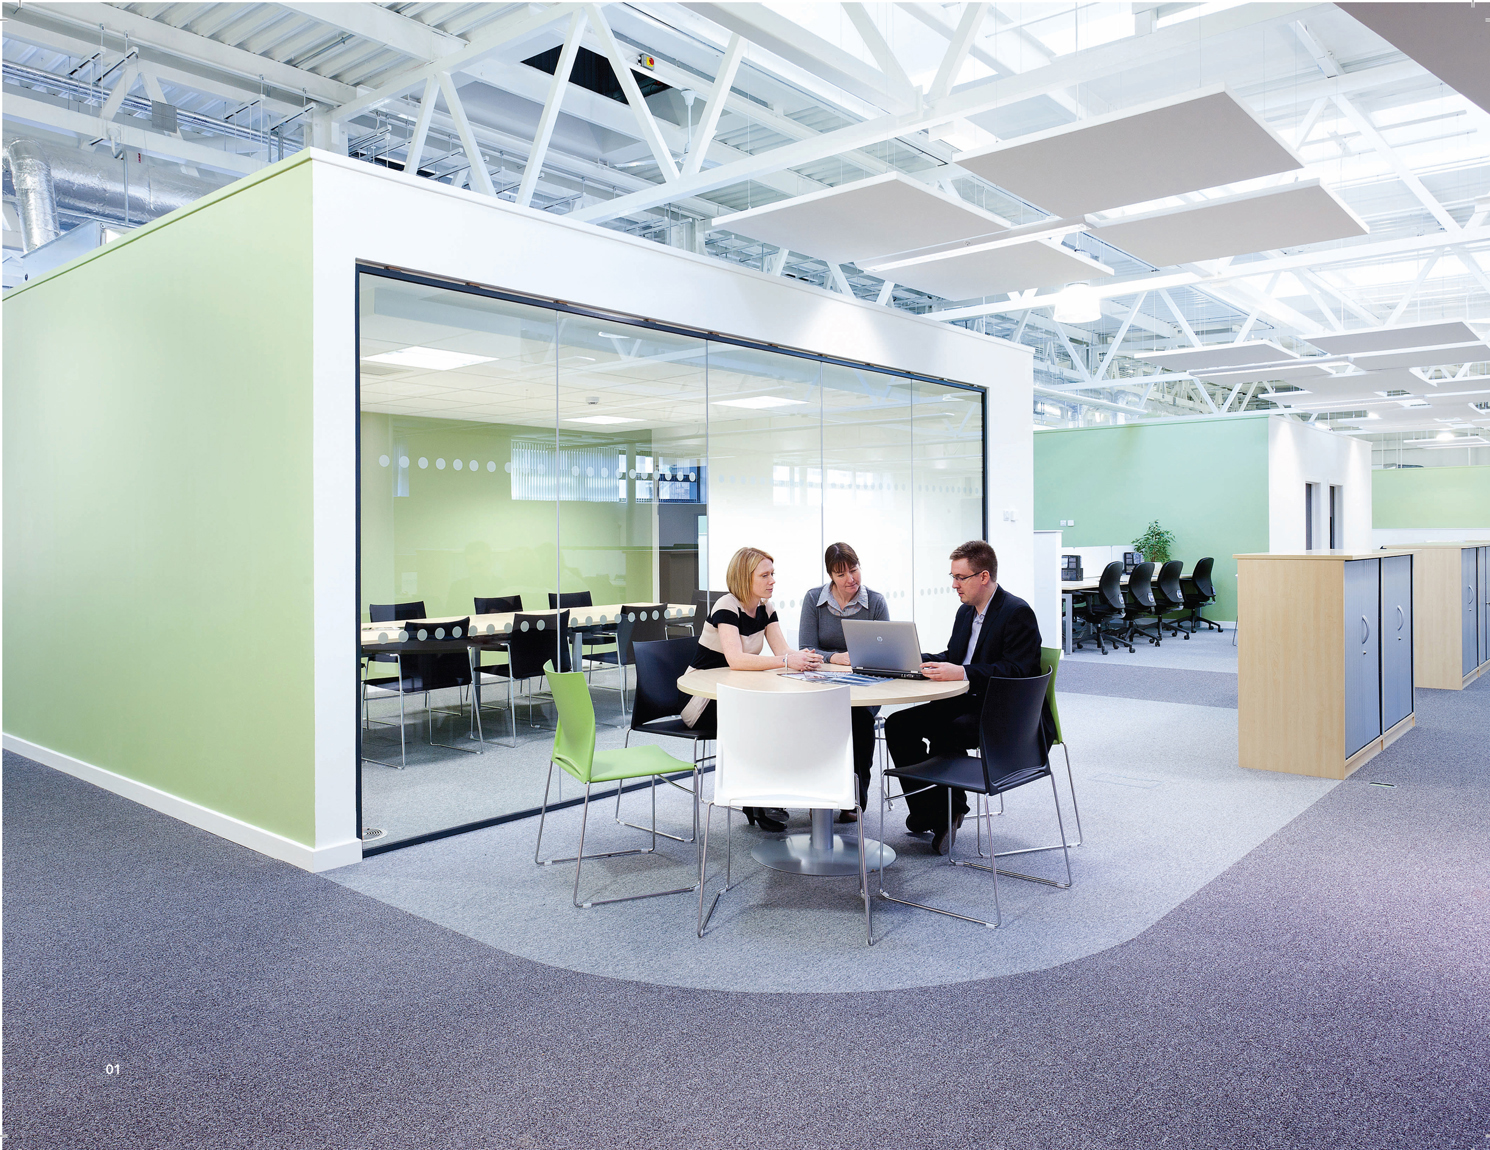 01 Breakout area for informal meetings, with meeting ‘pod’ behind